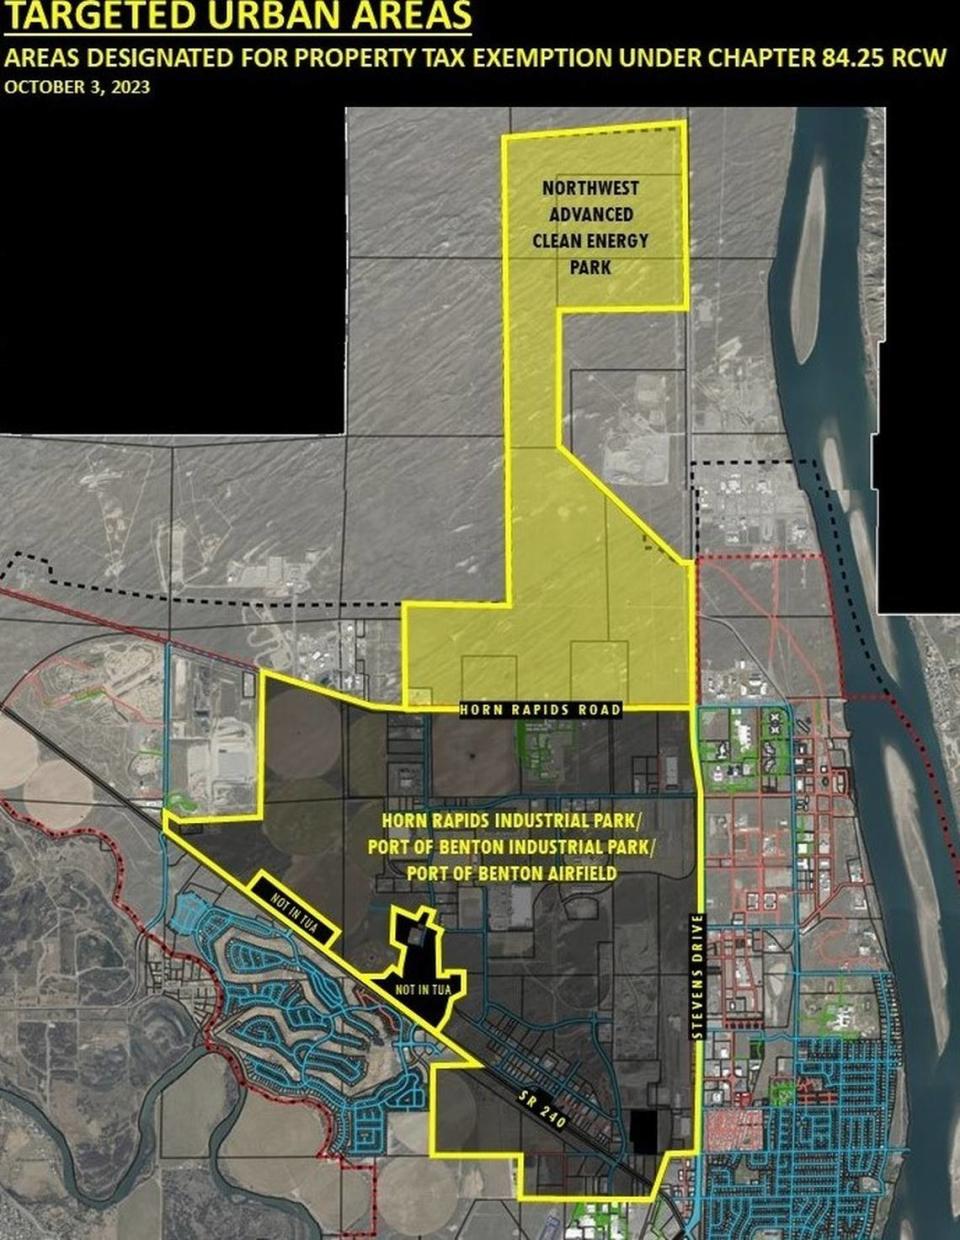 Richland established a targeted urban area to encourage manufacturing in January 2023 and later expanded it to include 1,641 acres that were formerly owned by the Department of Energy when it was annexed into the city.